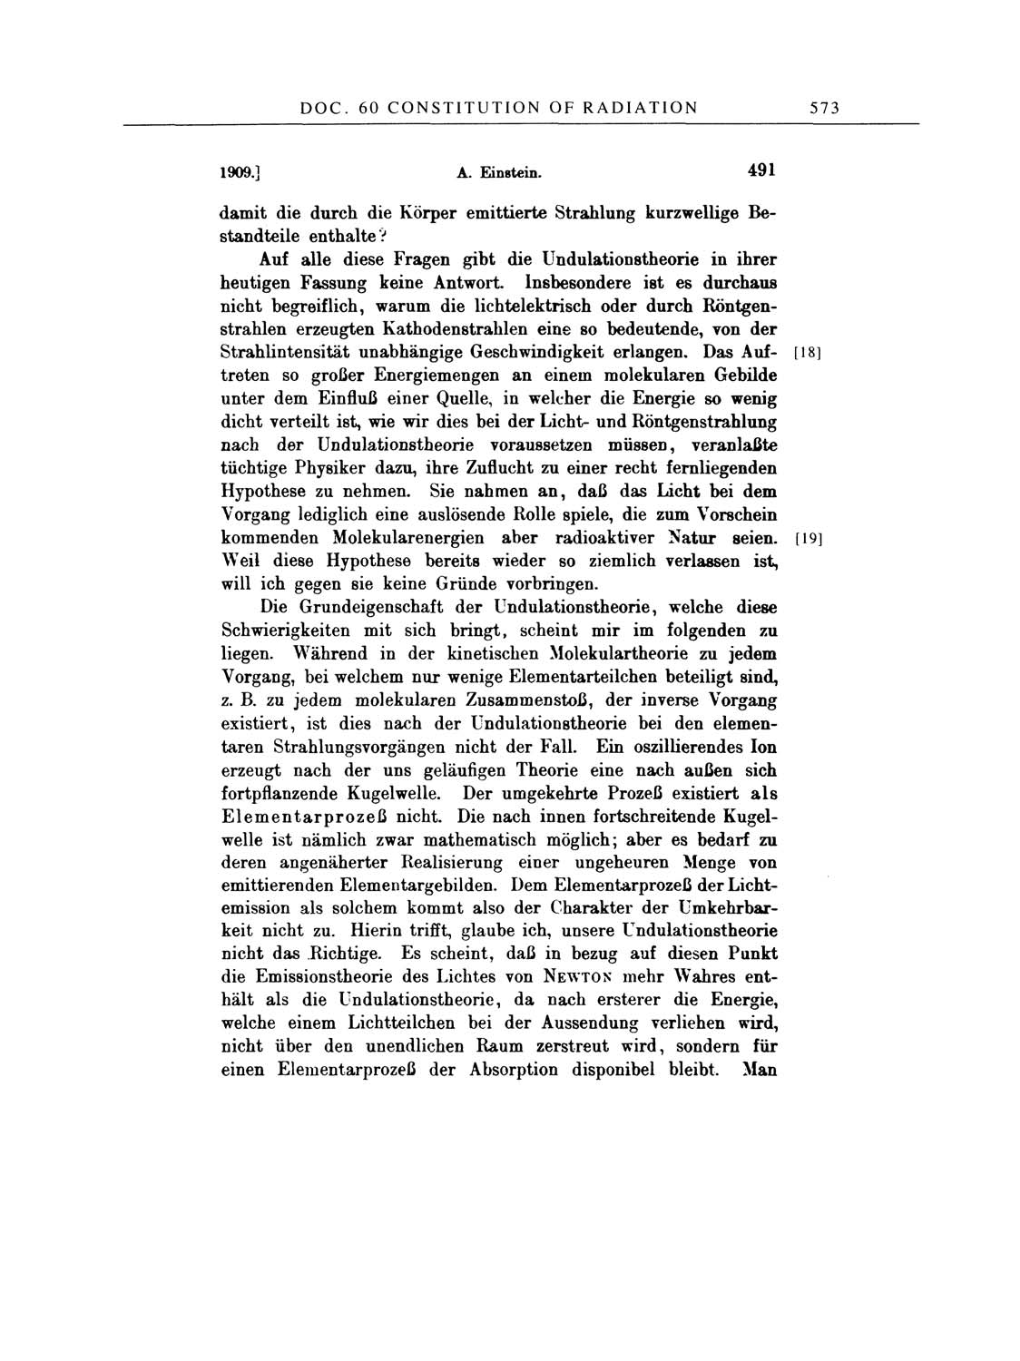 Volume 2: The Swiss Years: Writings, 1900-1909 page 573